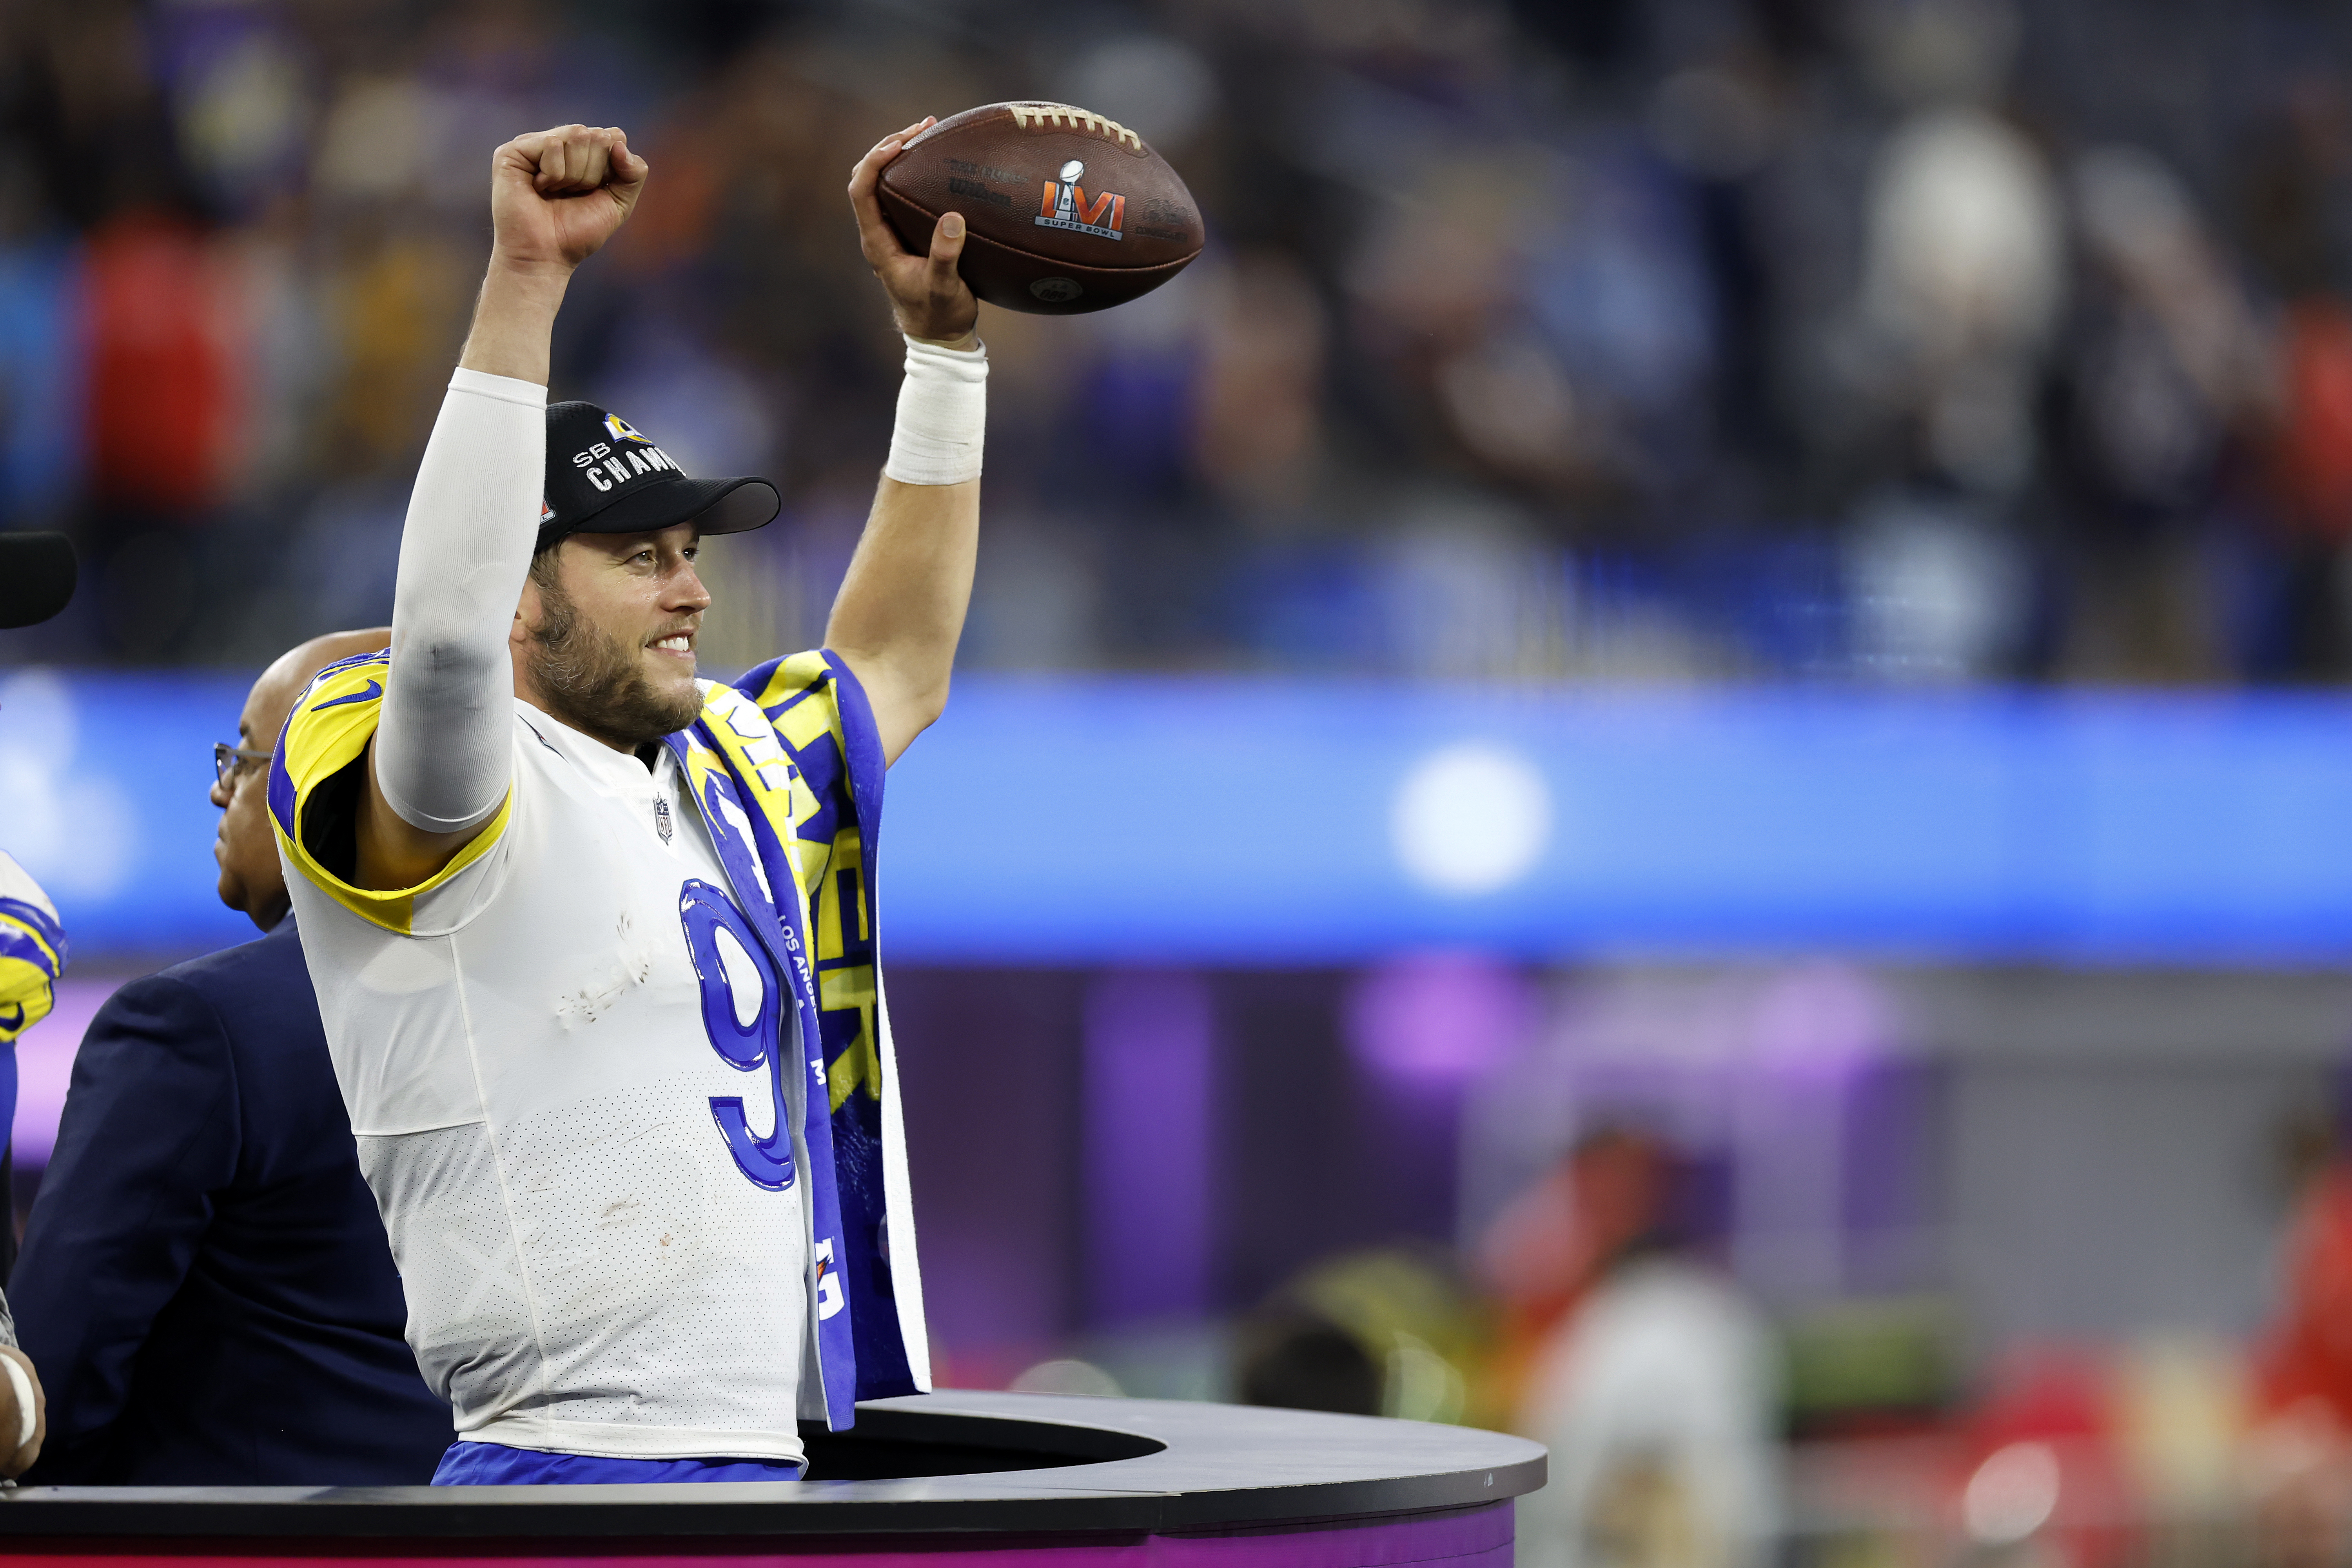 Highland Park to retire Matthew Stafford's jersey during Friday